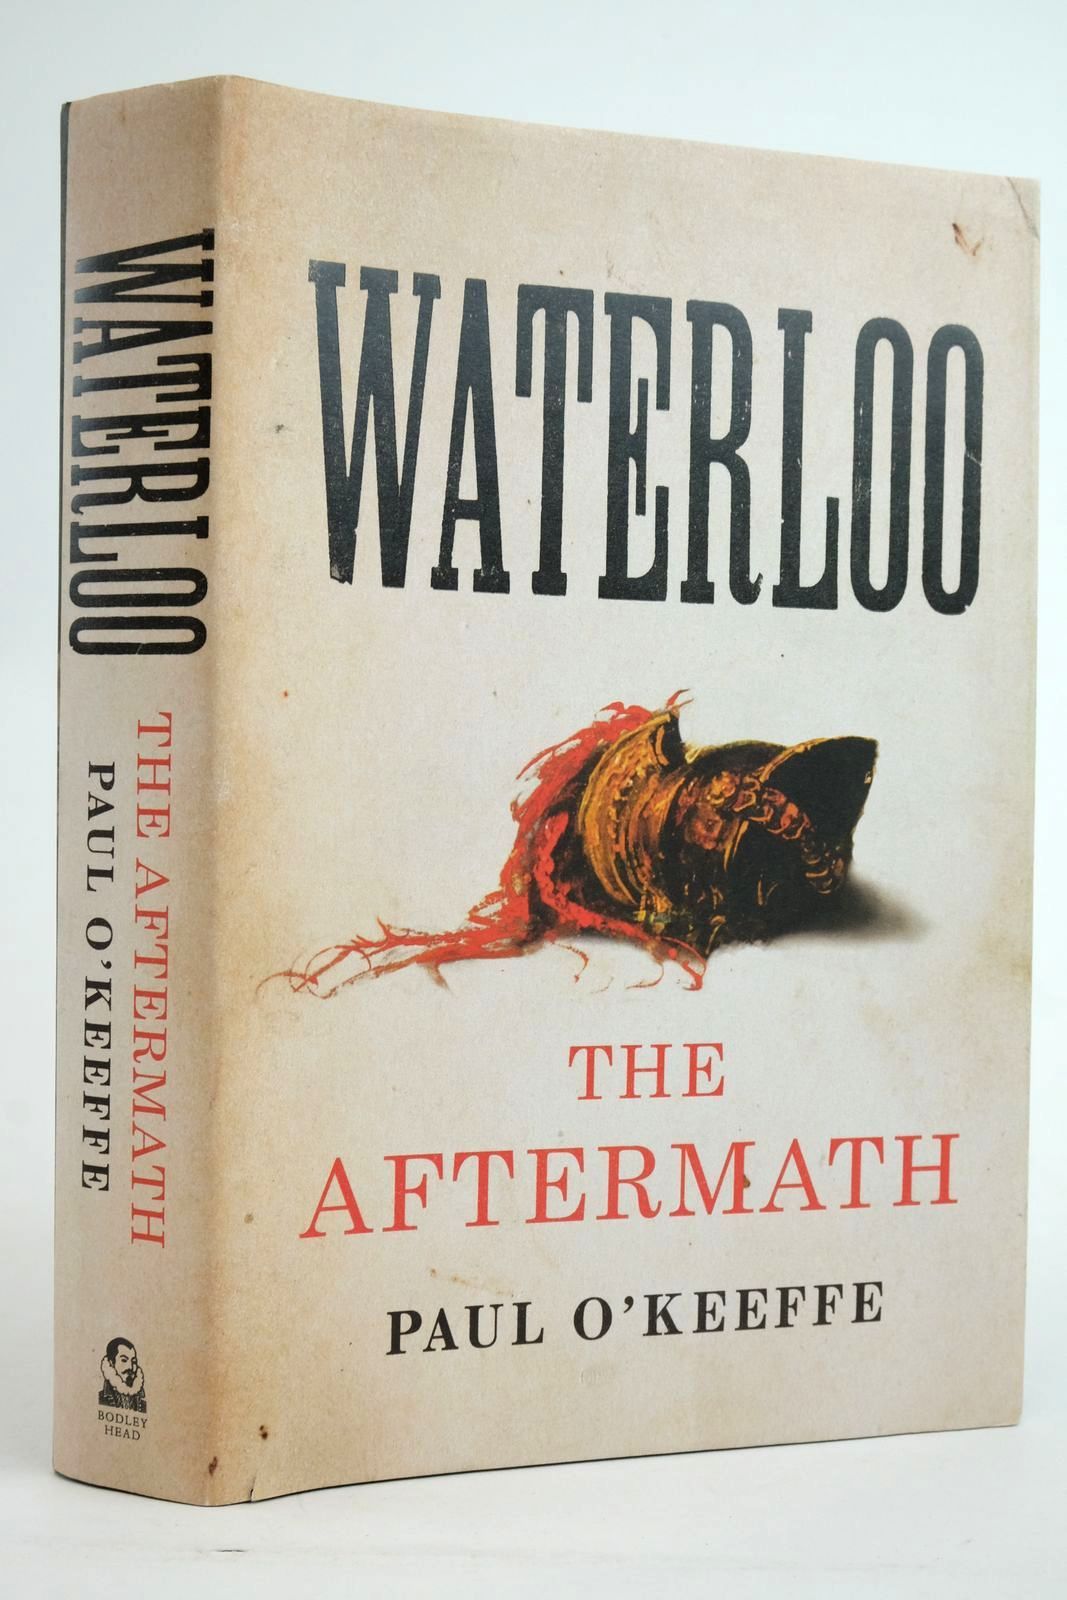 Photo of WATERLOO THE AFTERMATH written by O'Keeffe, Paul published by The Bodley Head (STOCK CODE: 2135930)  for sale by Stella & Rose's Books